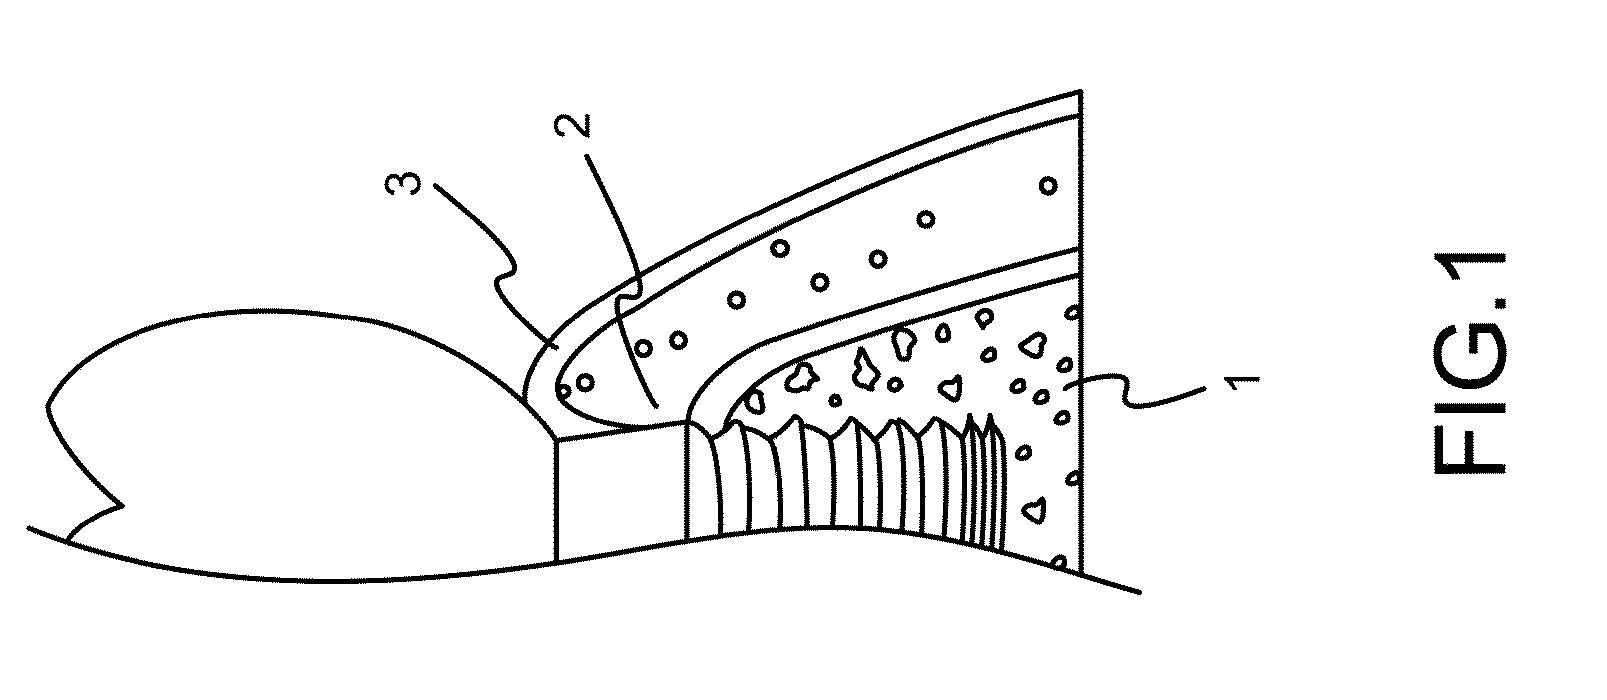 Implant Surface Treatment Method Having Tissues Integrated